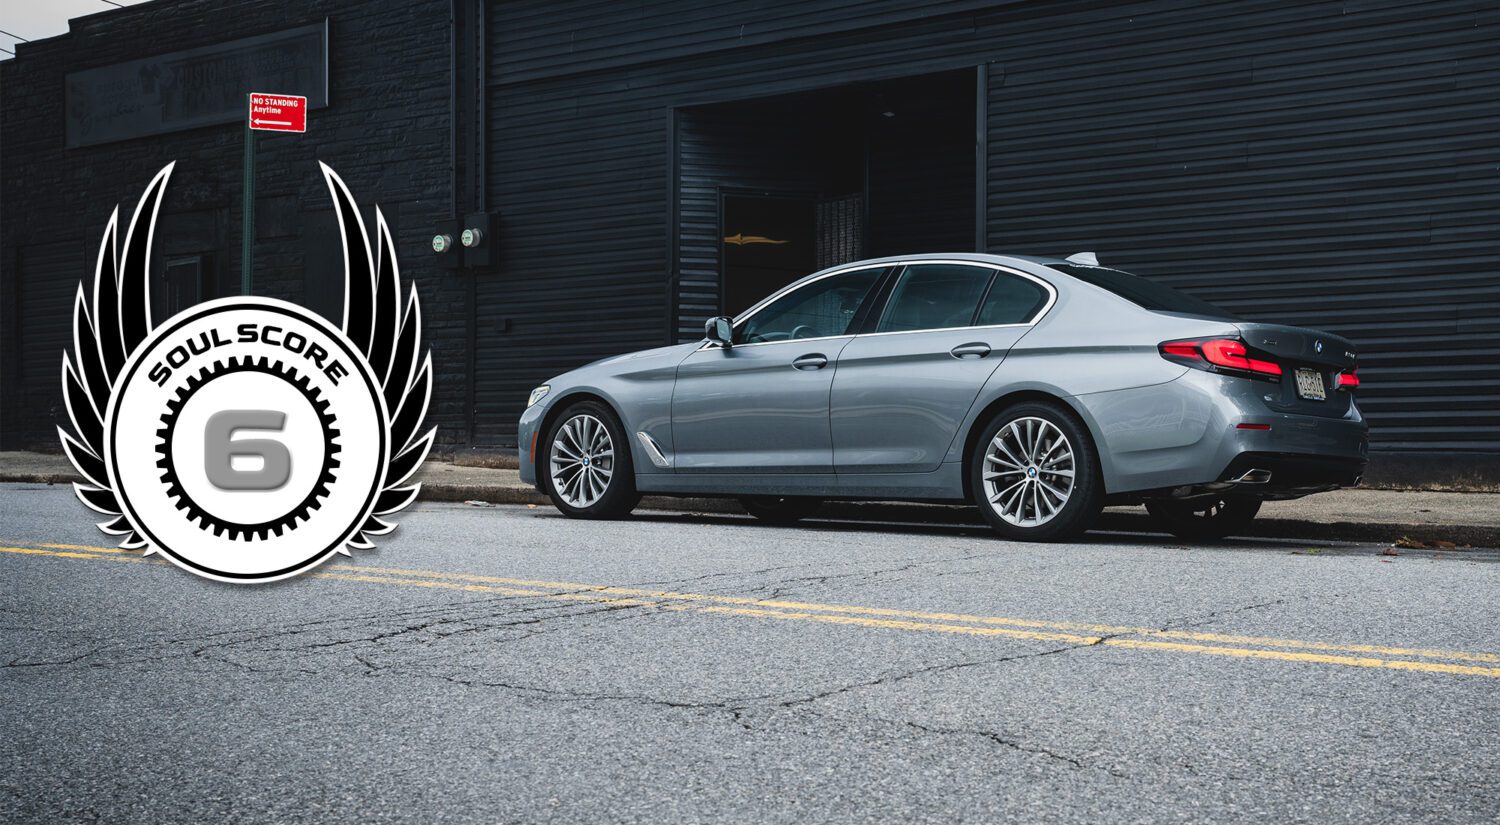 The BMW 530i xDrive has a place in this world